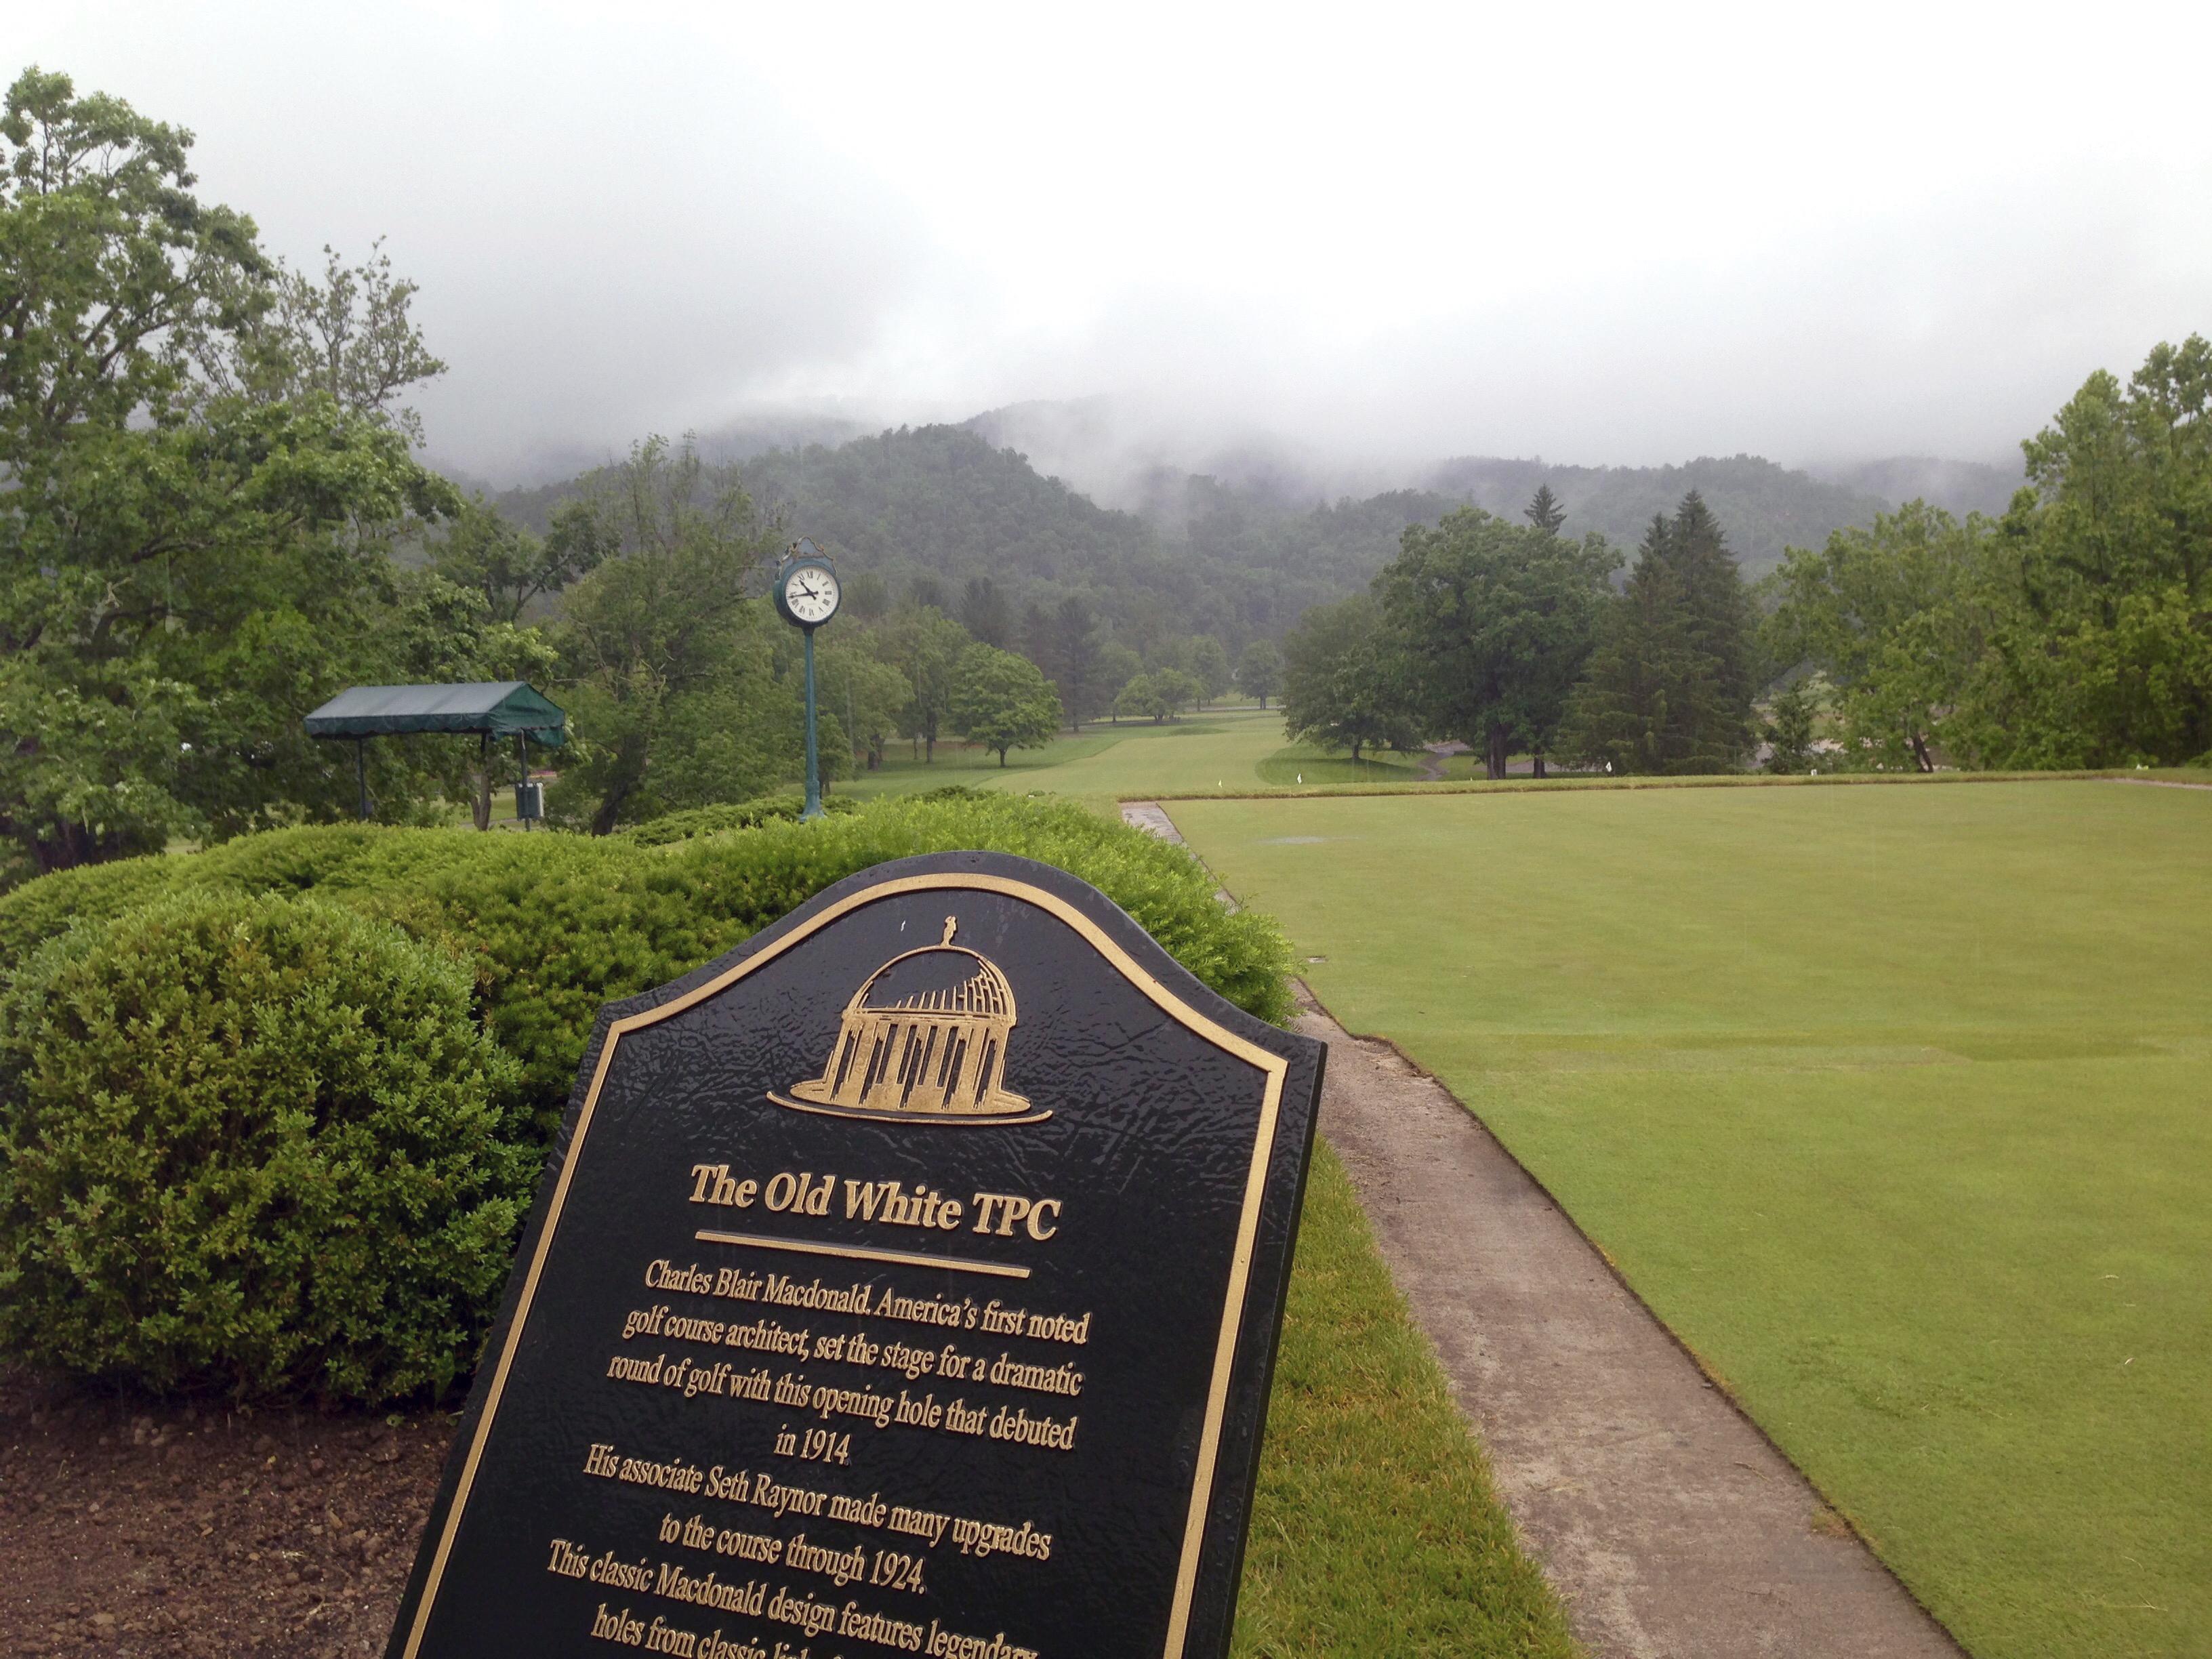 Flood Repaired Course Almost Ready For Greenbrier Classic